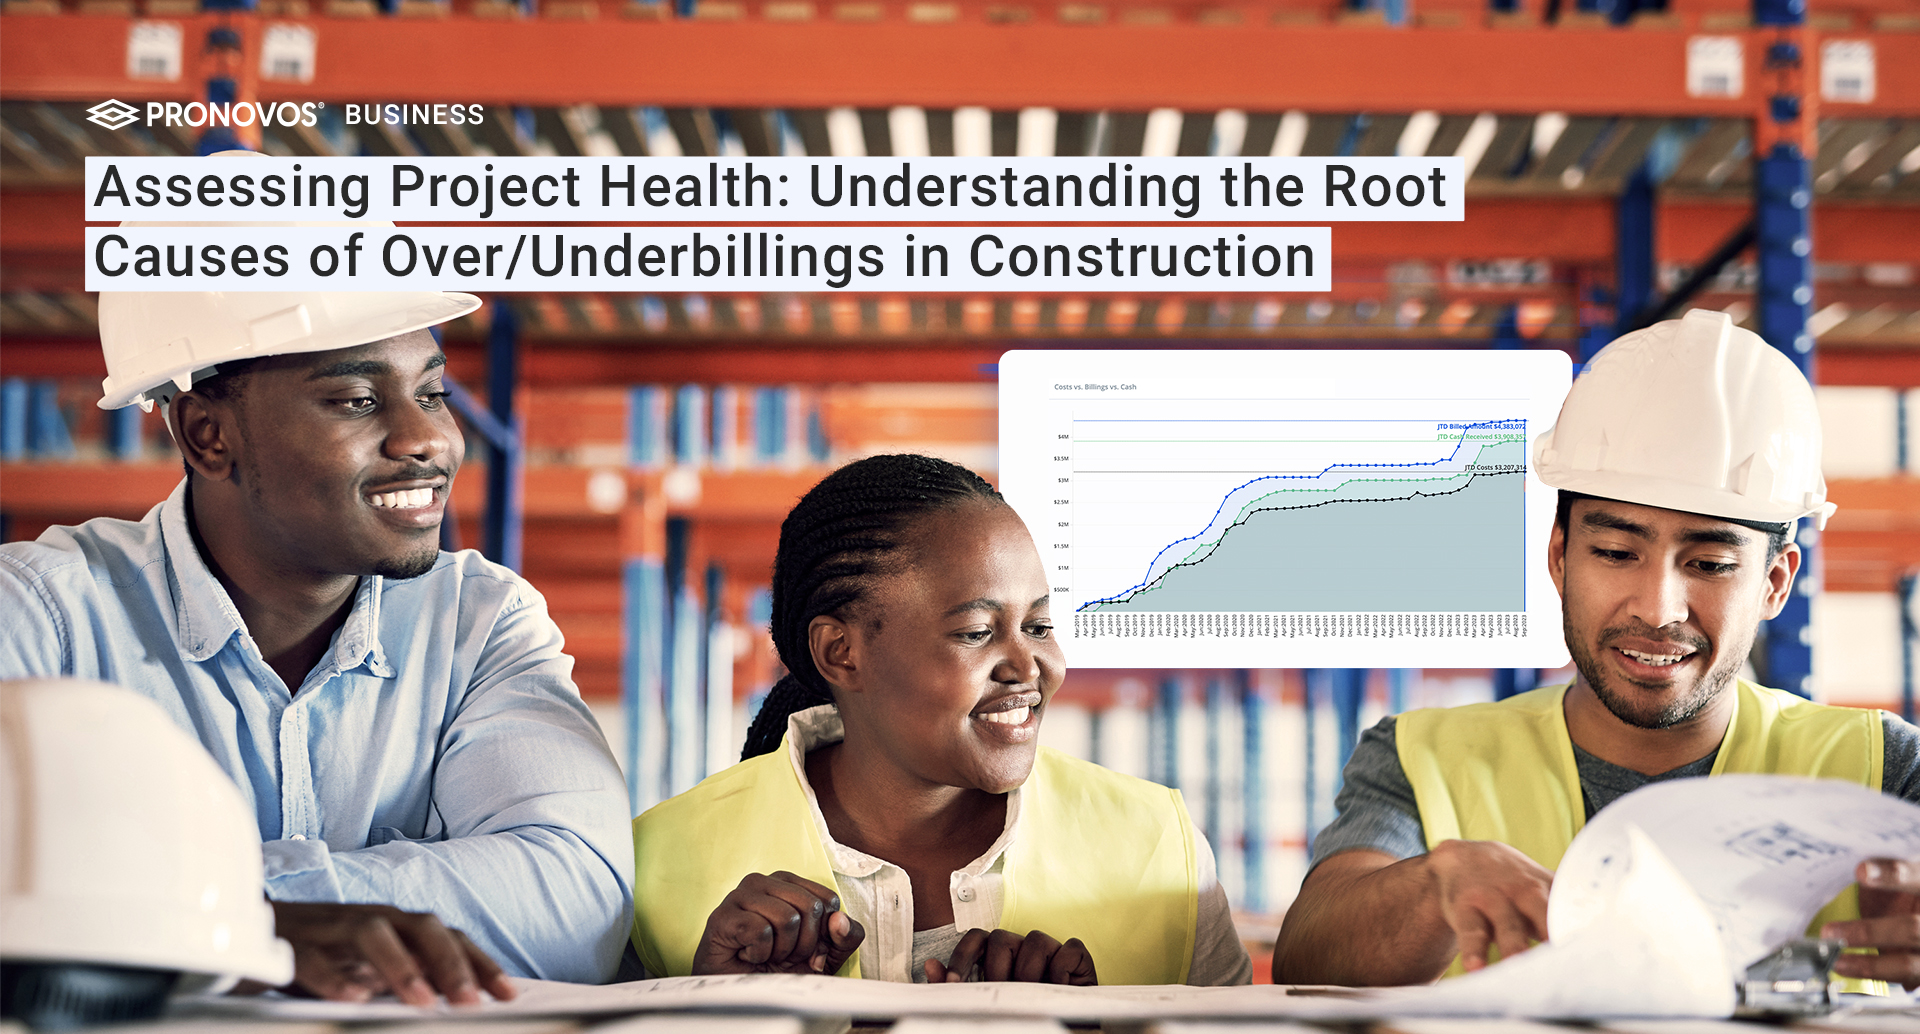 Assessing Project Health: Understanding the Root Causes of Over/Underbillings in Construction